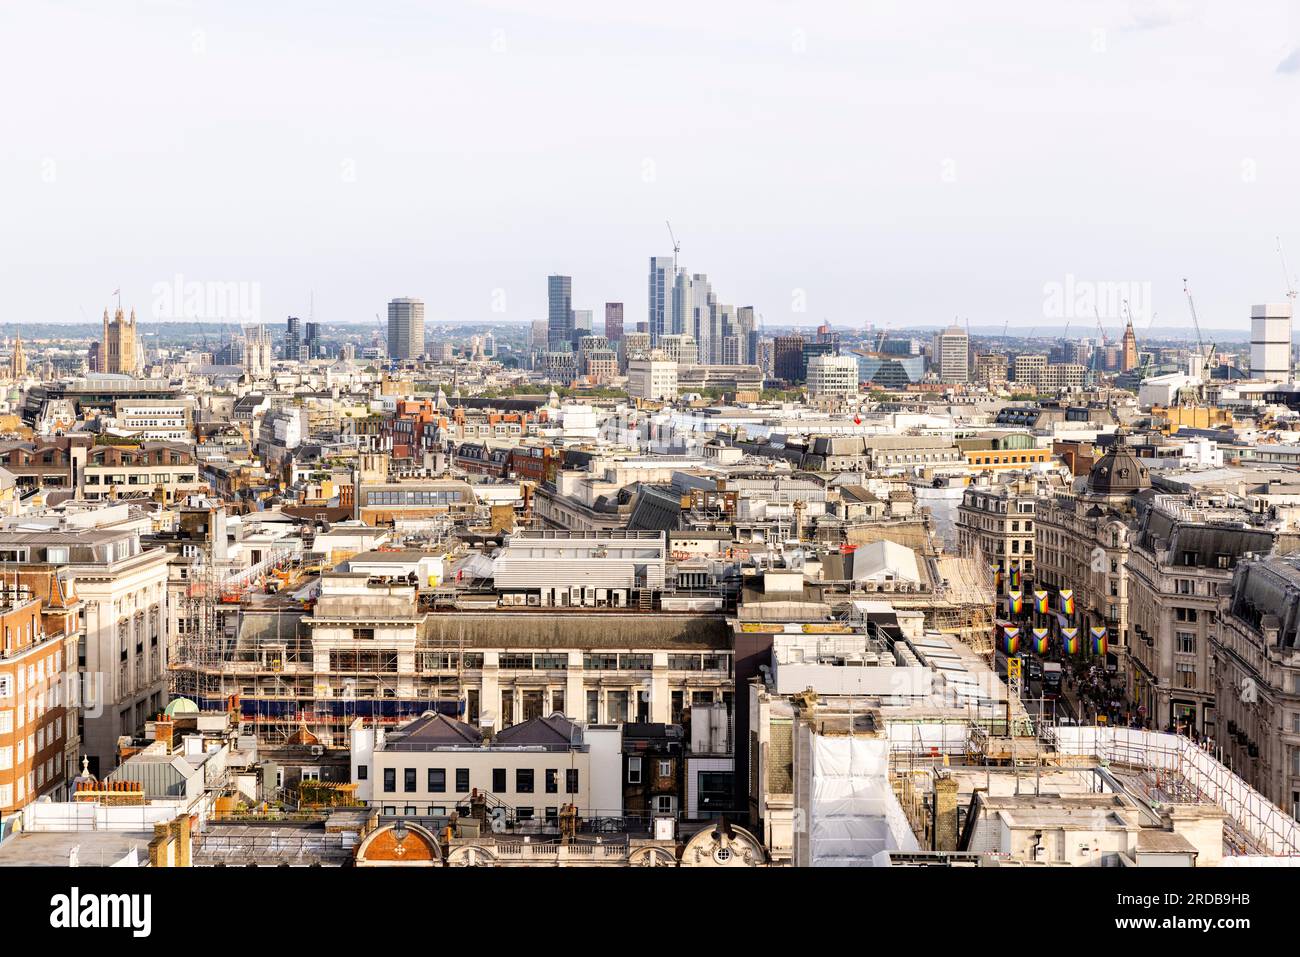 Looking South from a building rooftop along Regent Street, London. Stock Photo